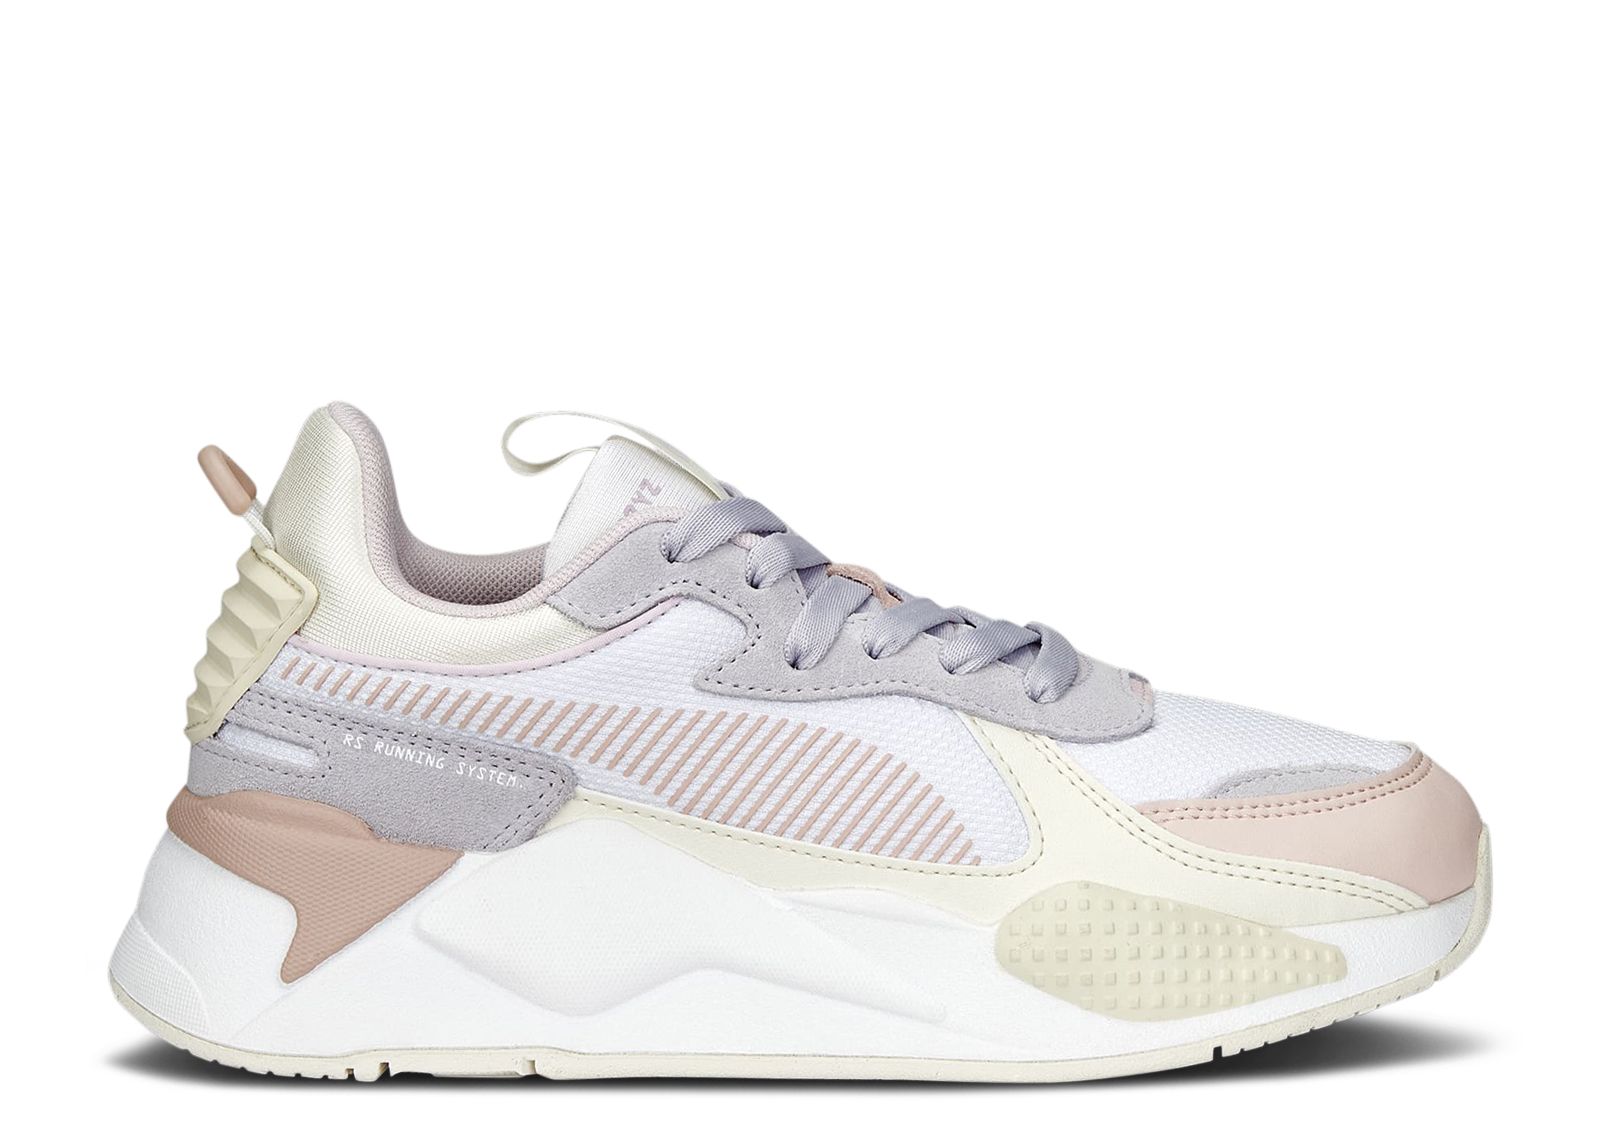 Кроссовки Puma Wmns Rs-X 'Candy - White Spring Lavender', белый rs x candy